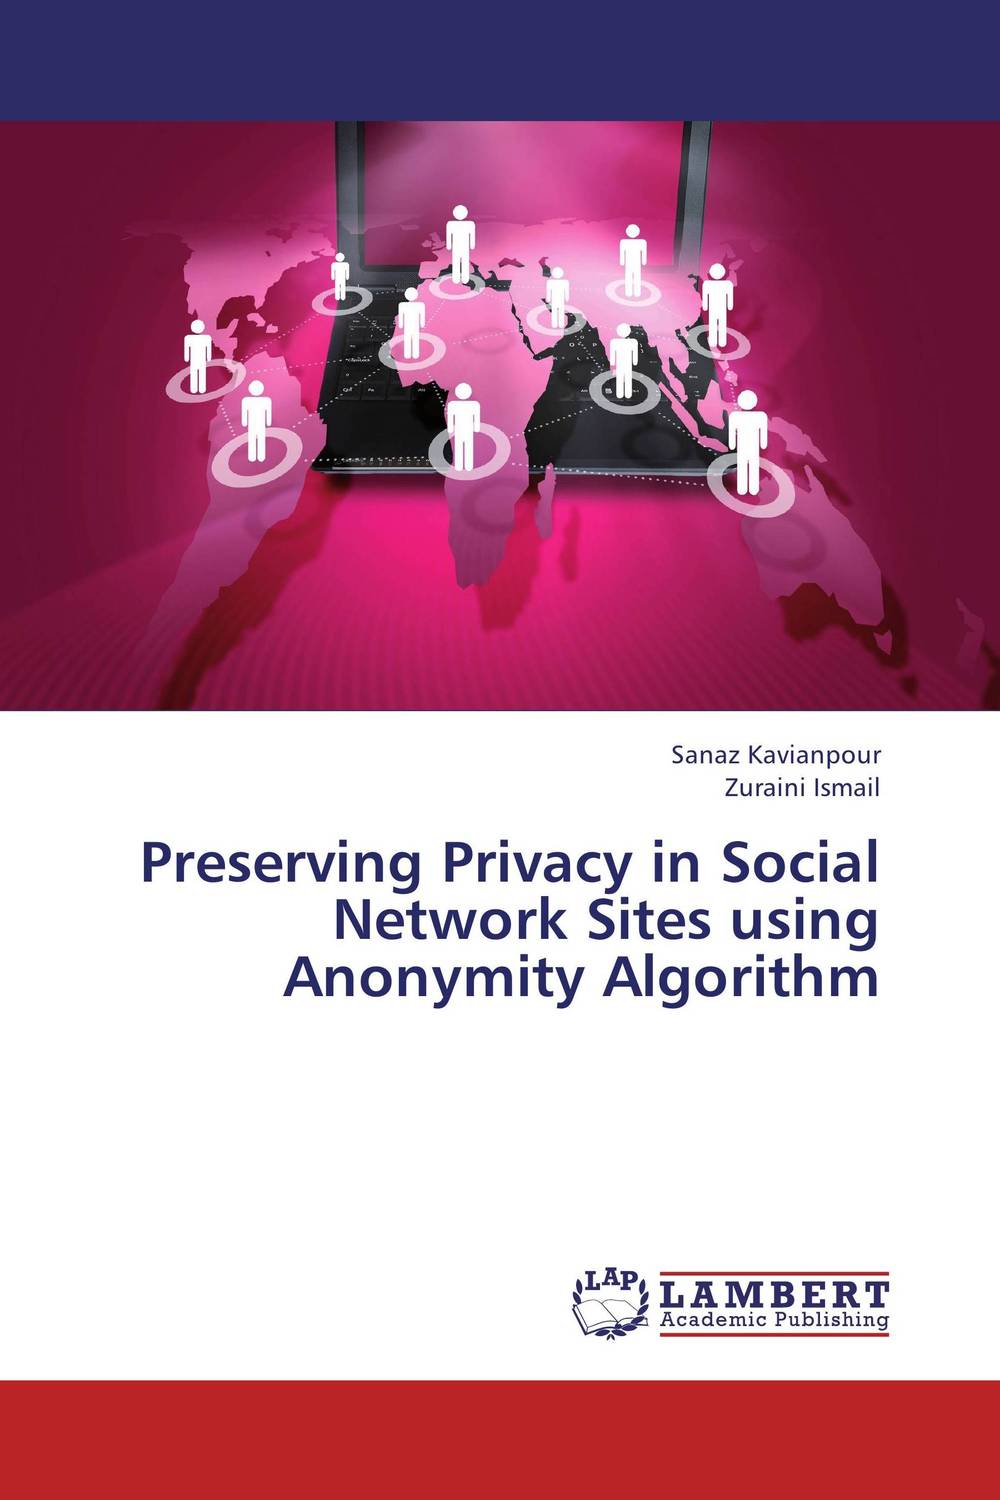 Preserving Privacy in Social Network Sites using Anonymity Algorithm